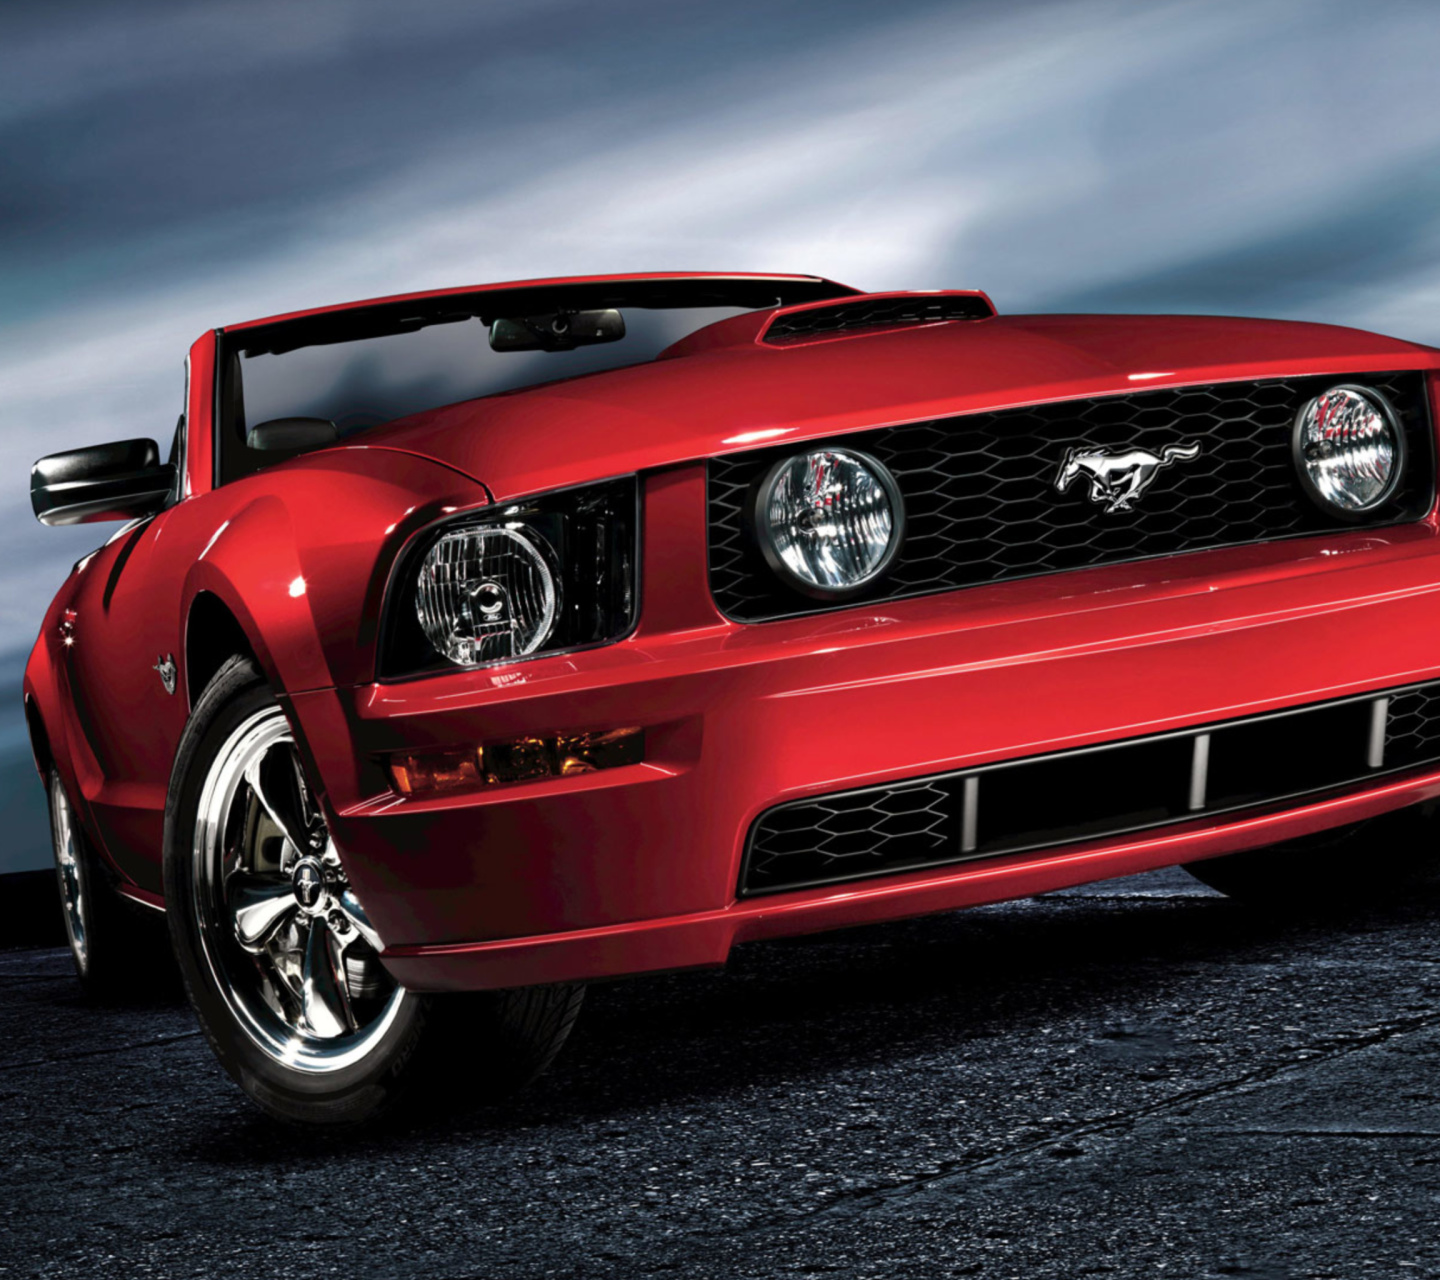 Ford Mustang Shelby GT500 wallpaper 1440x1280